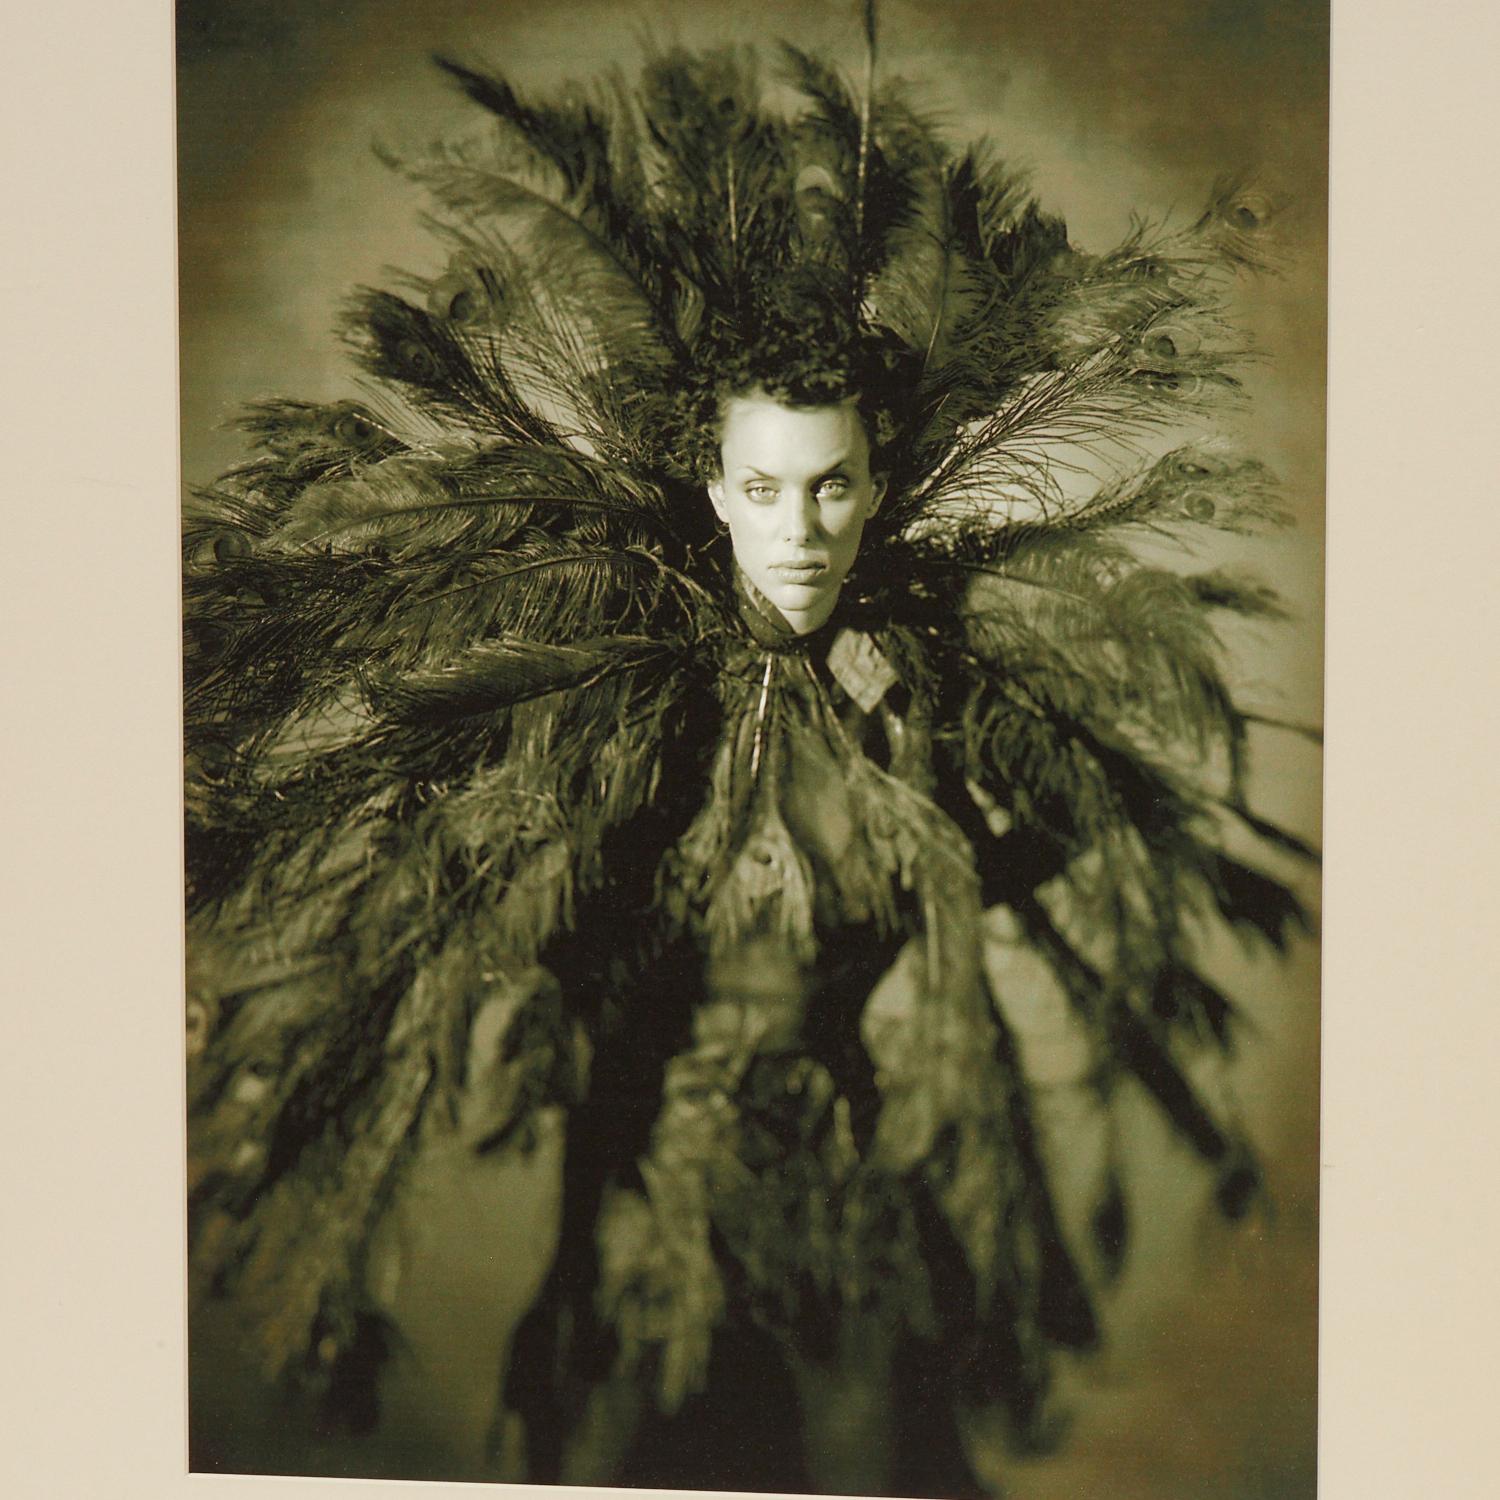 Late 20th C. a high quality giclee print on matte paper, pencil signed (illegibly) below matte and framed under glass. The subject is a very striking woman wearing a richly feathered garment. There is an ethereal almost haunting quality to this